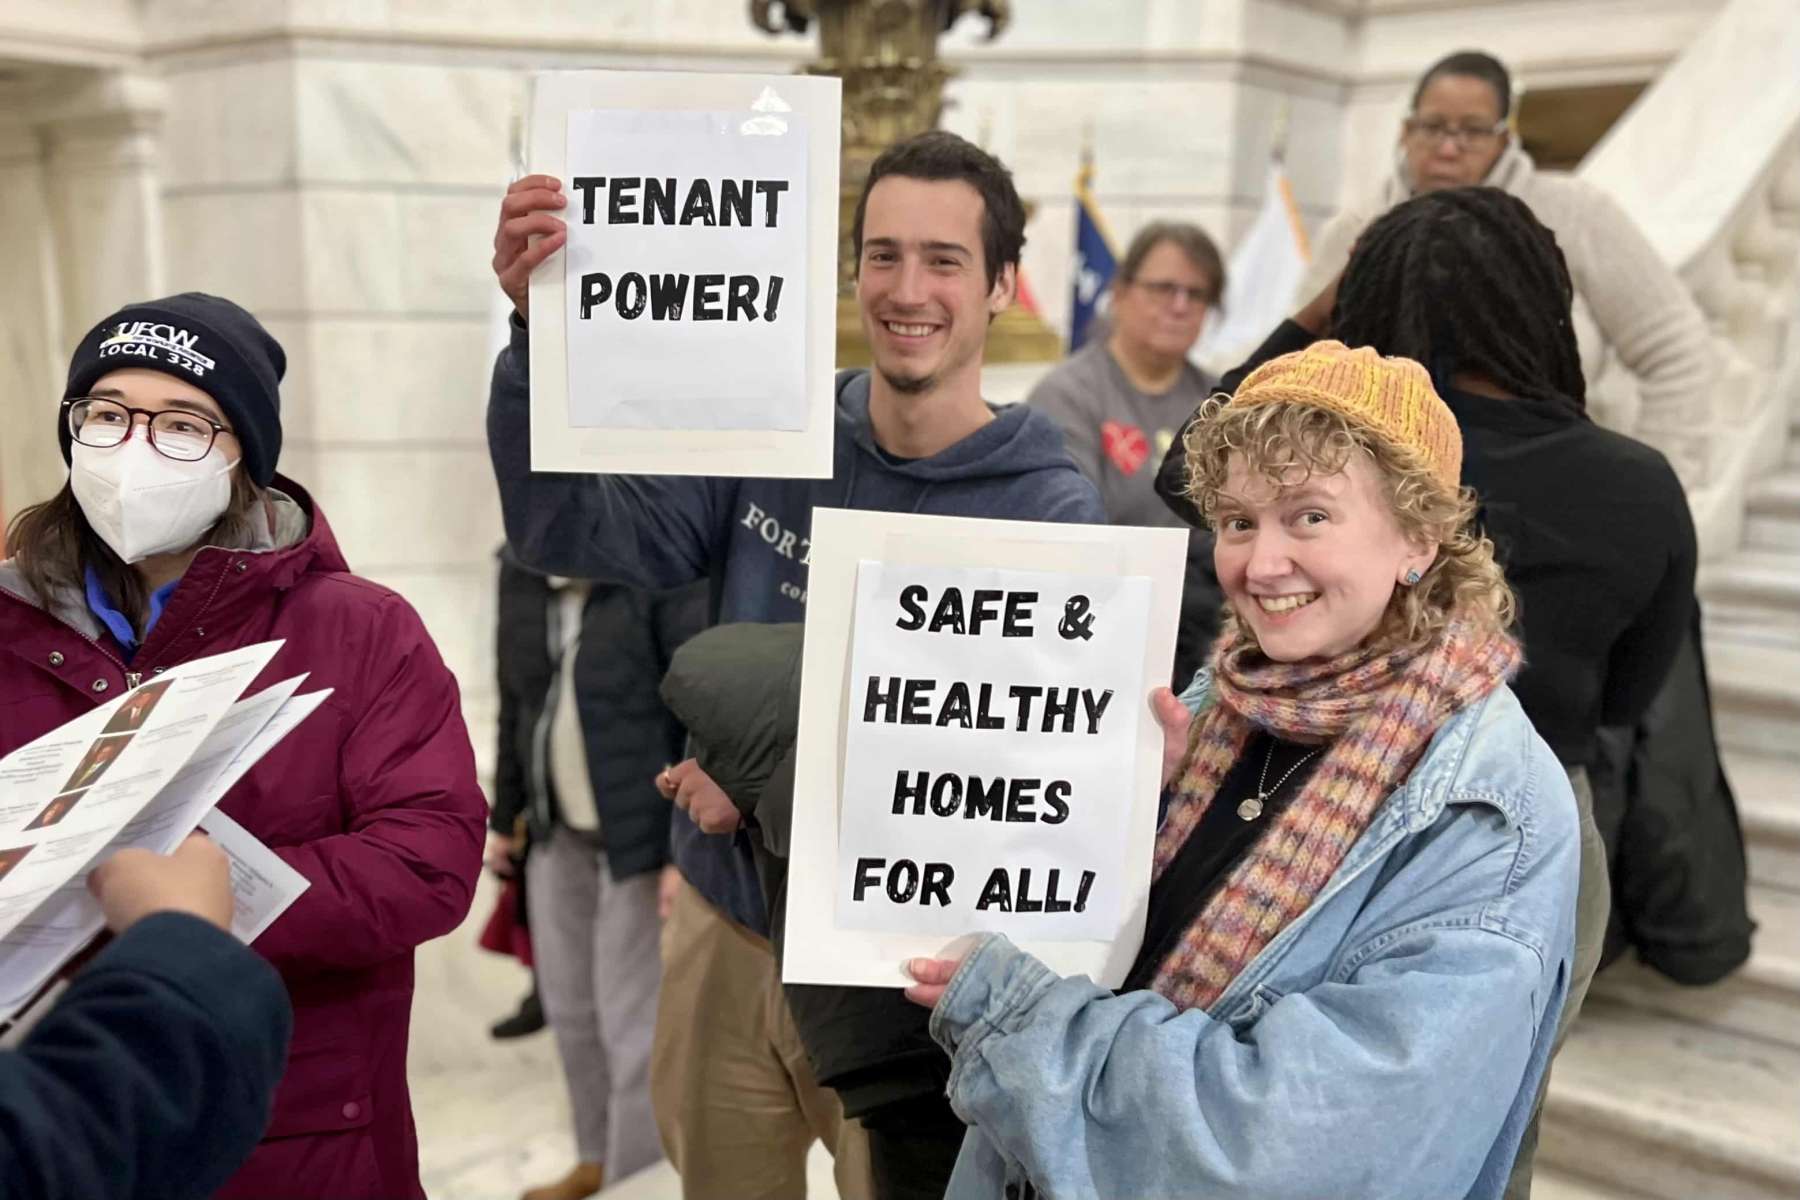 Pioneer Tenants United rally for safe housing, legal rights for renters